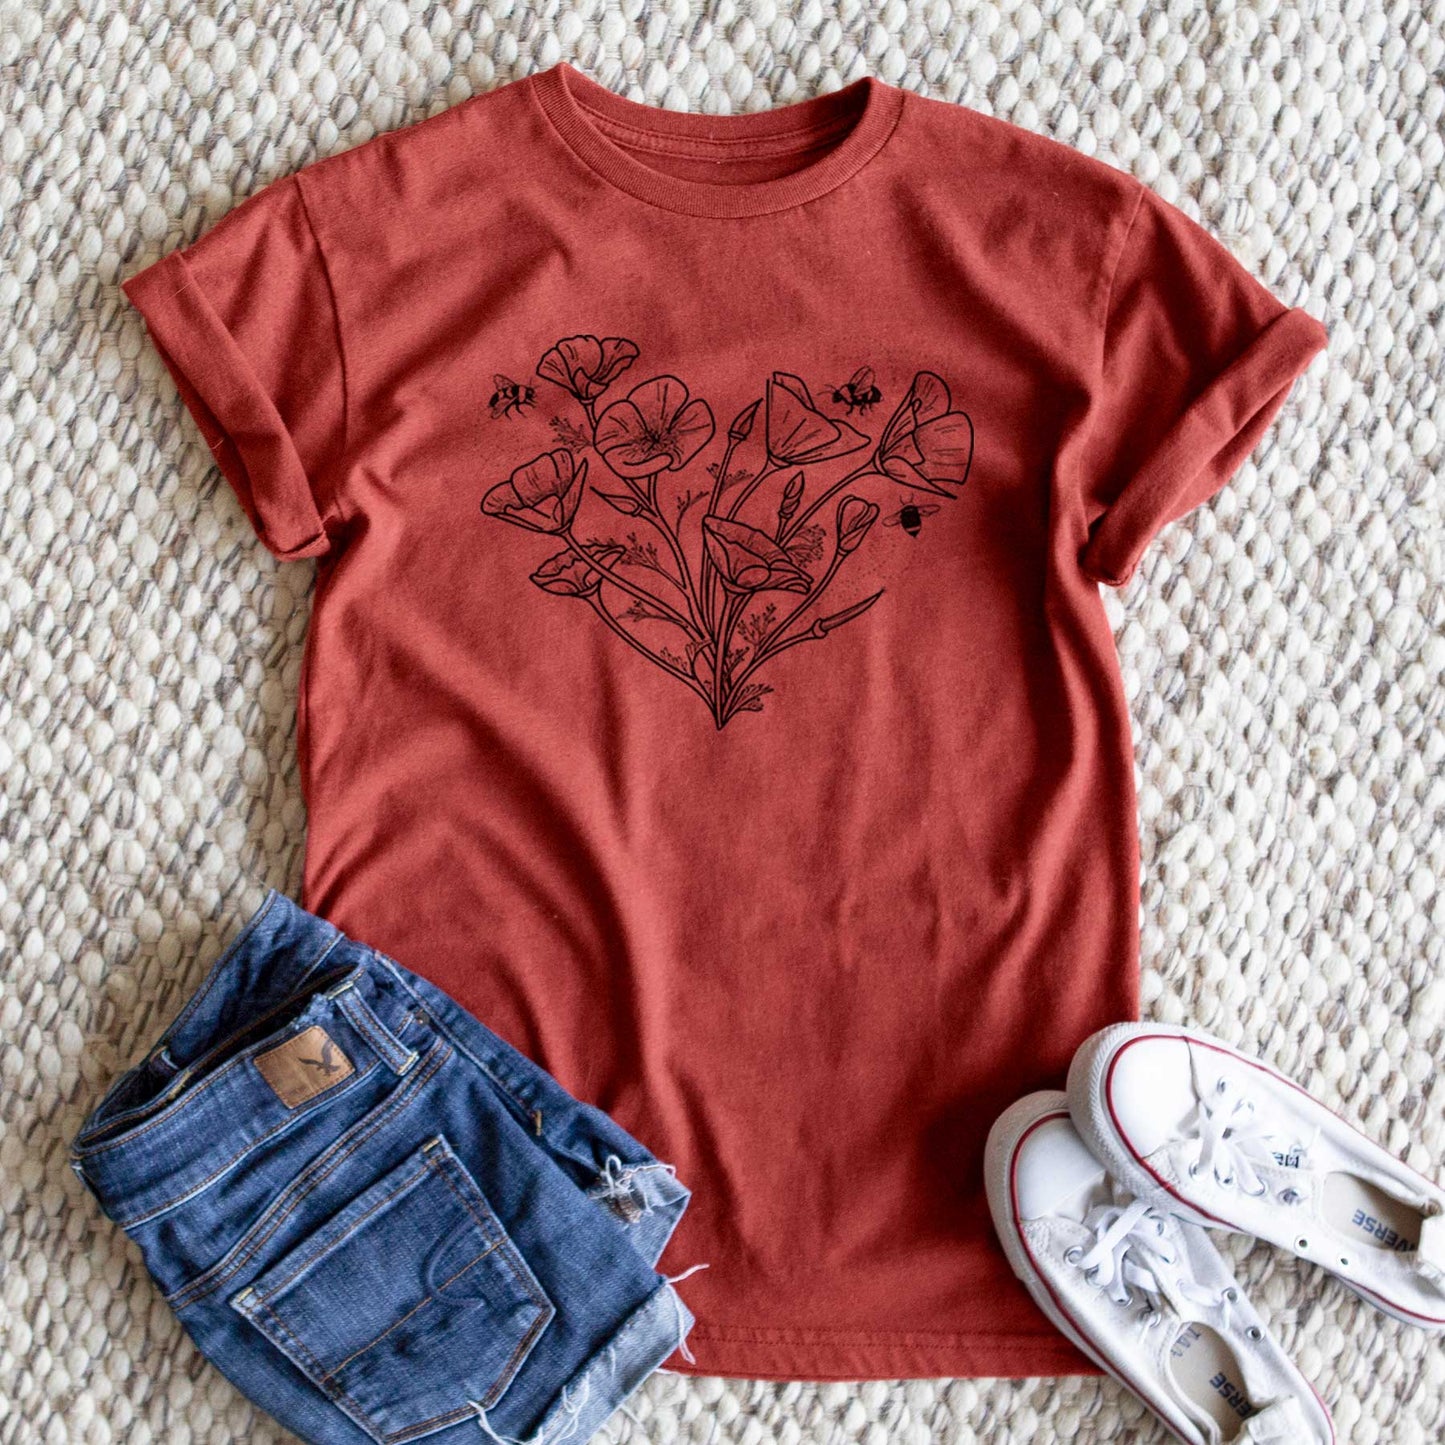 California Poppy Heart - Unisex Recycled Eco Tee by Because Tees